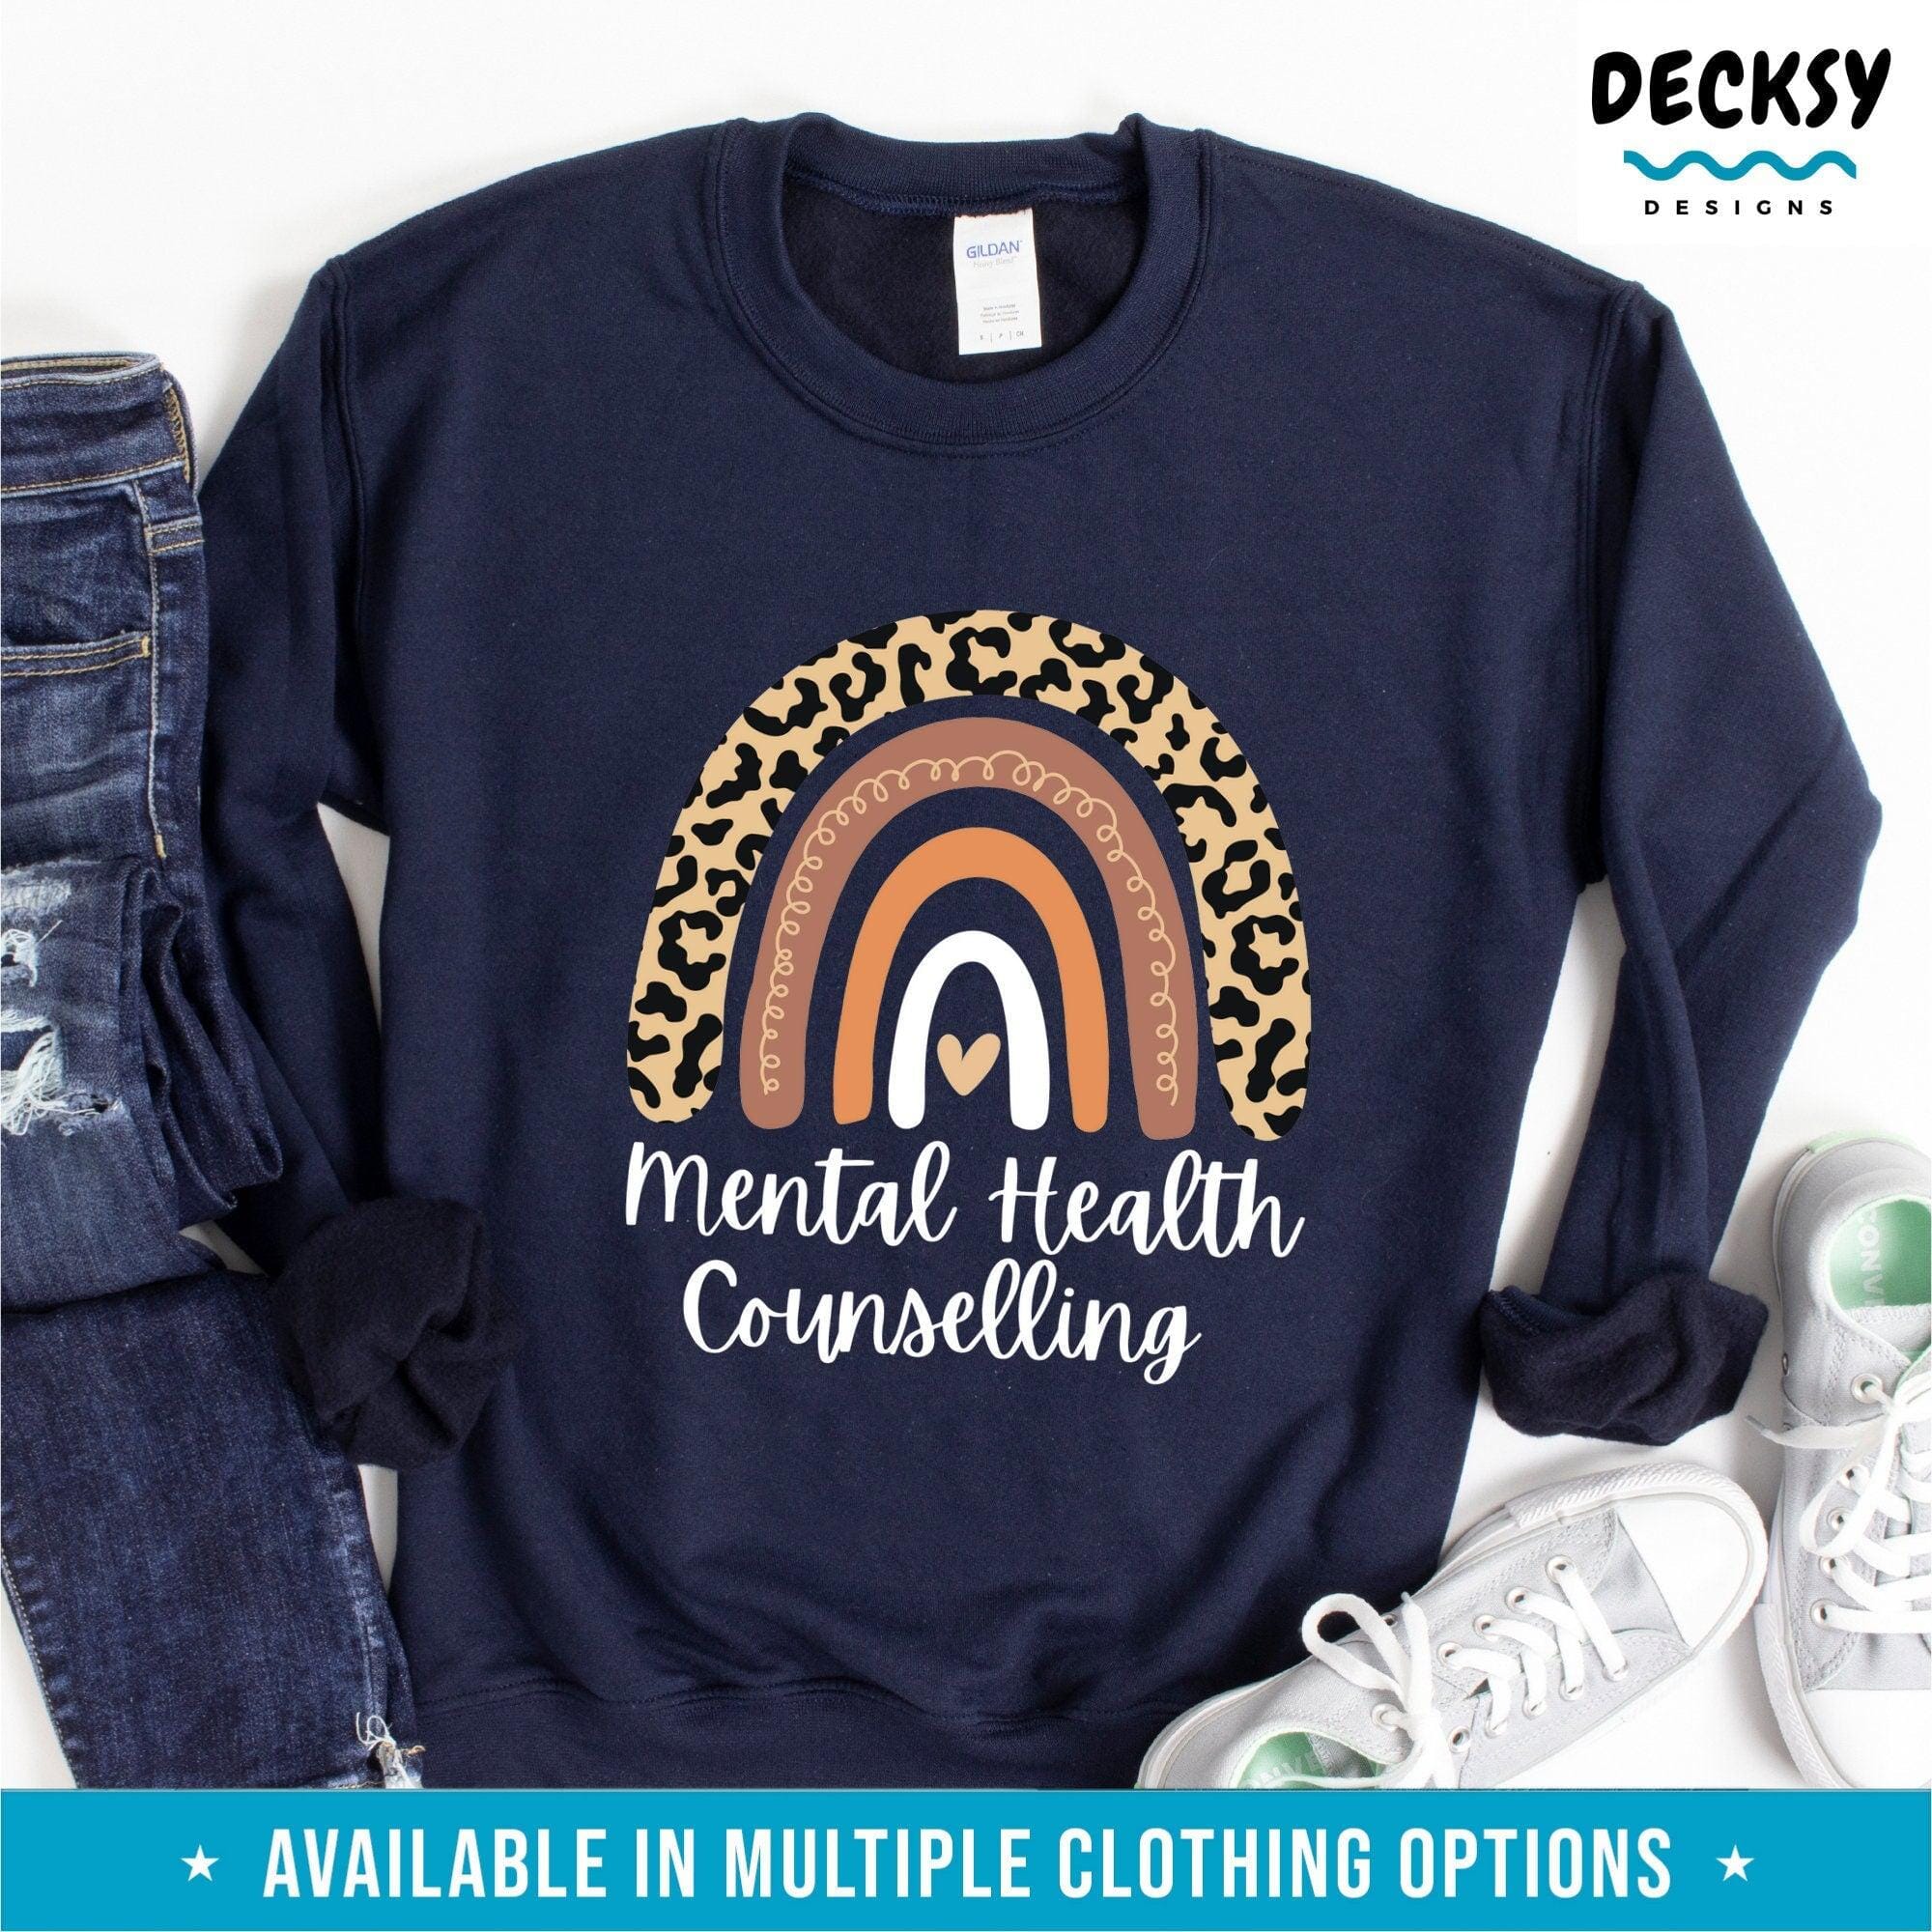 Mental Health Counselling Shirt, Gift For Therapist-Clothing:Gender-Neutral Adult Clothing:Tops & Tees:T-shirts:Graphic Tees-DecksyDesigns